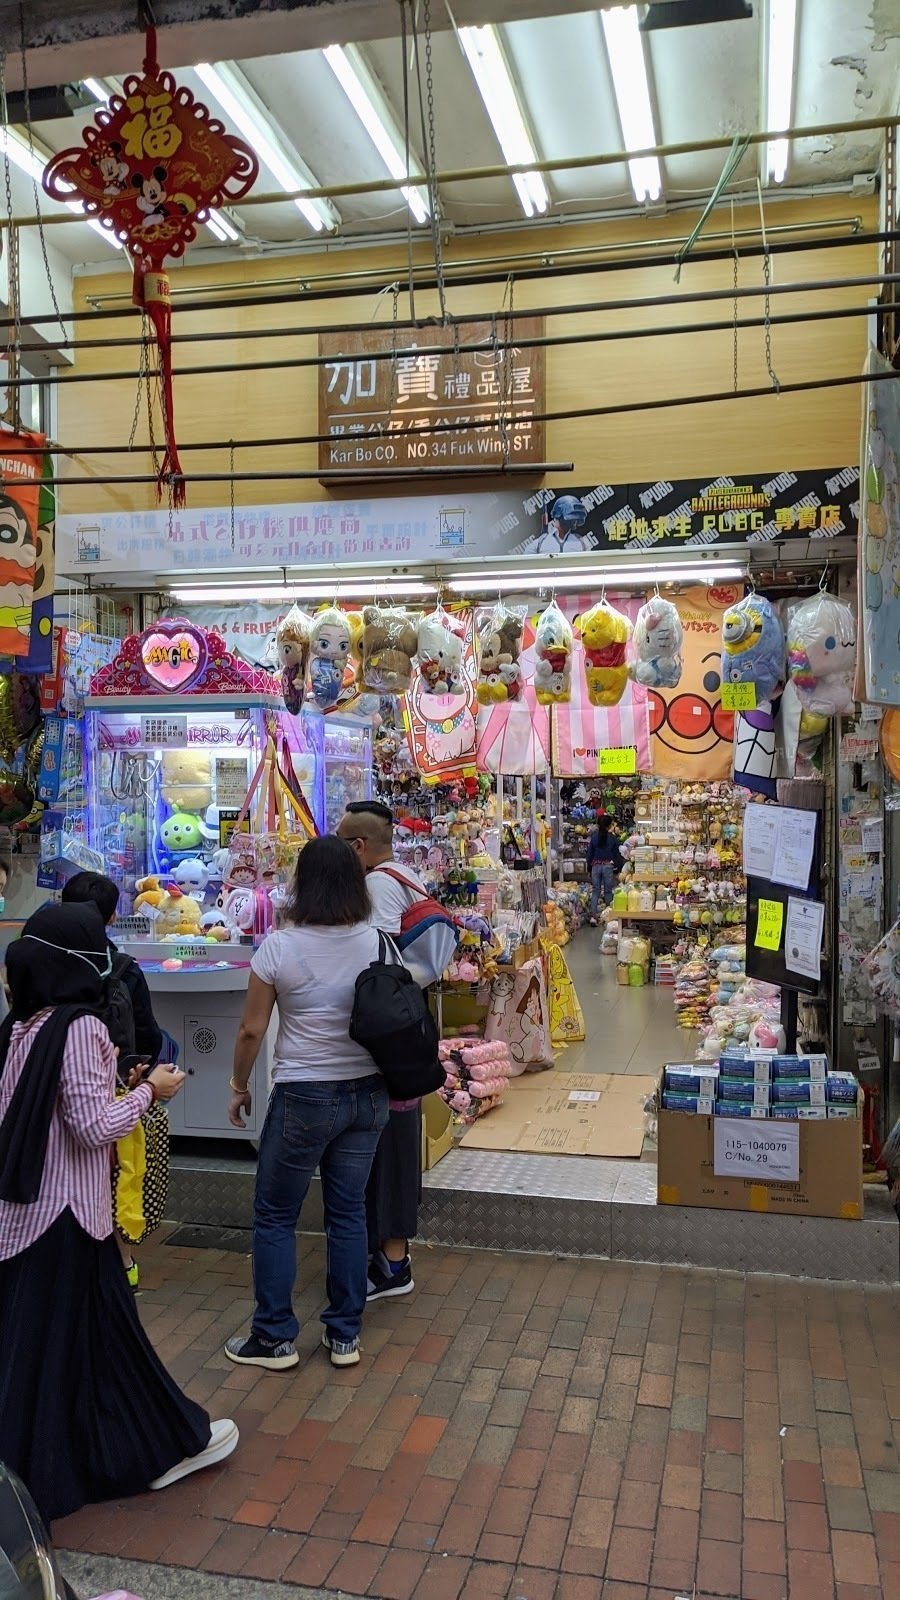 <span class="translation_missing" title="translation missing: en.meta.location_title, location_name: 加寶禮品屋, city: Hong Kong">Location Title</span>